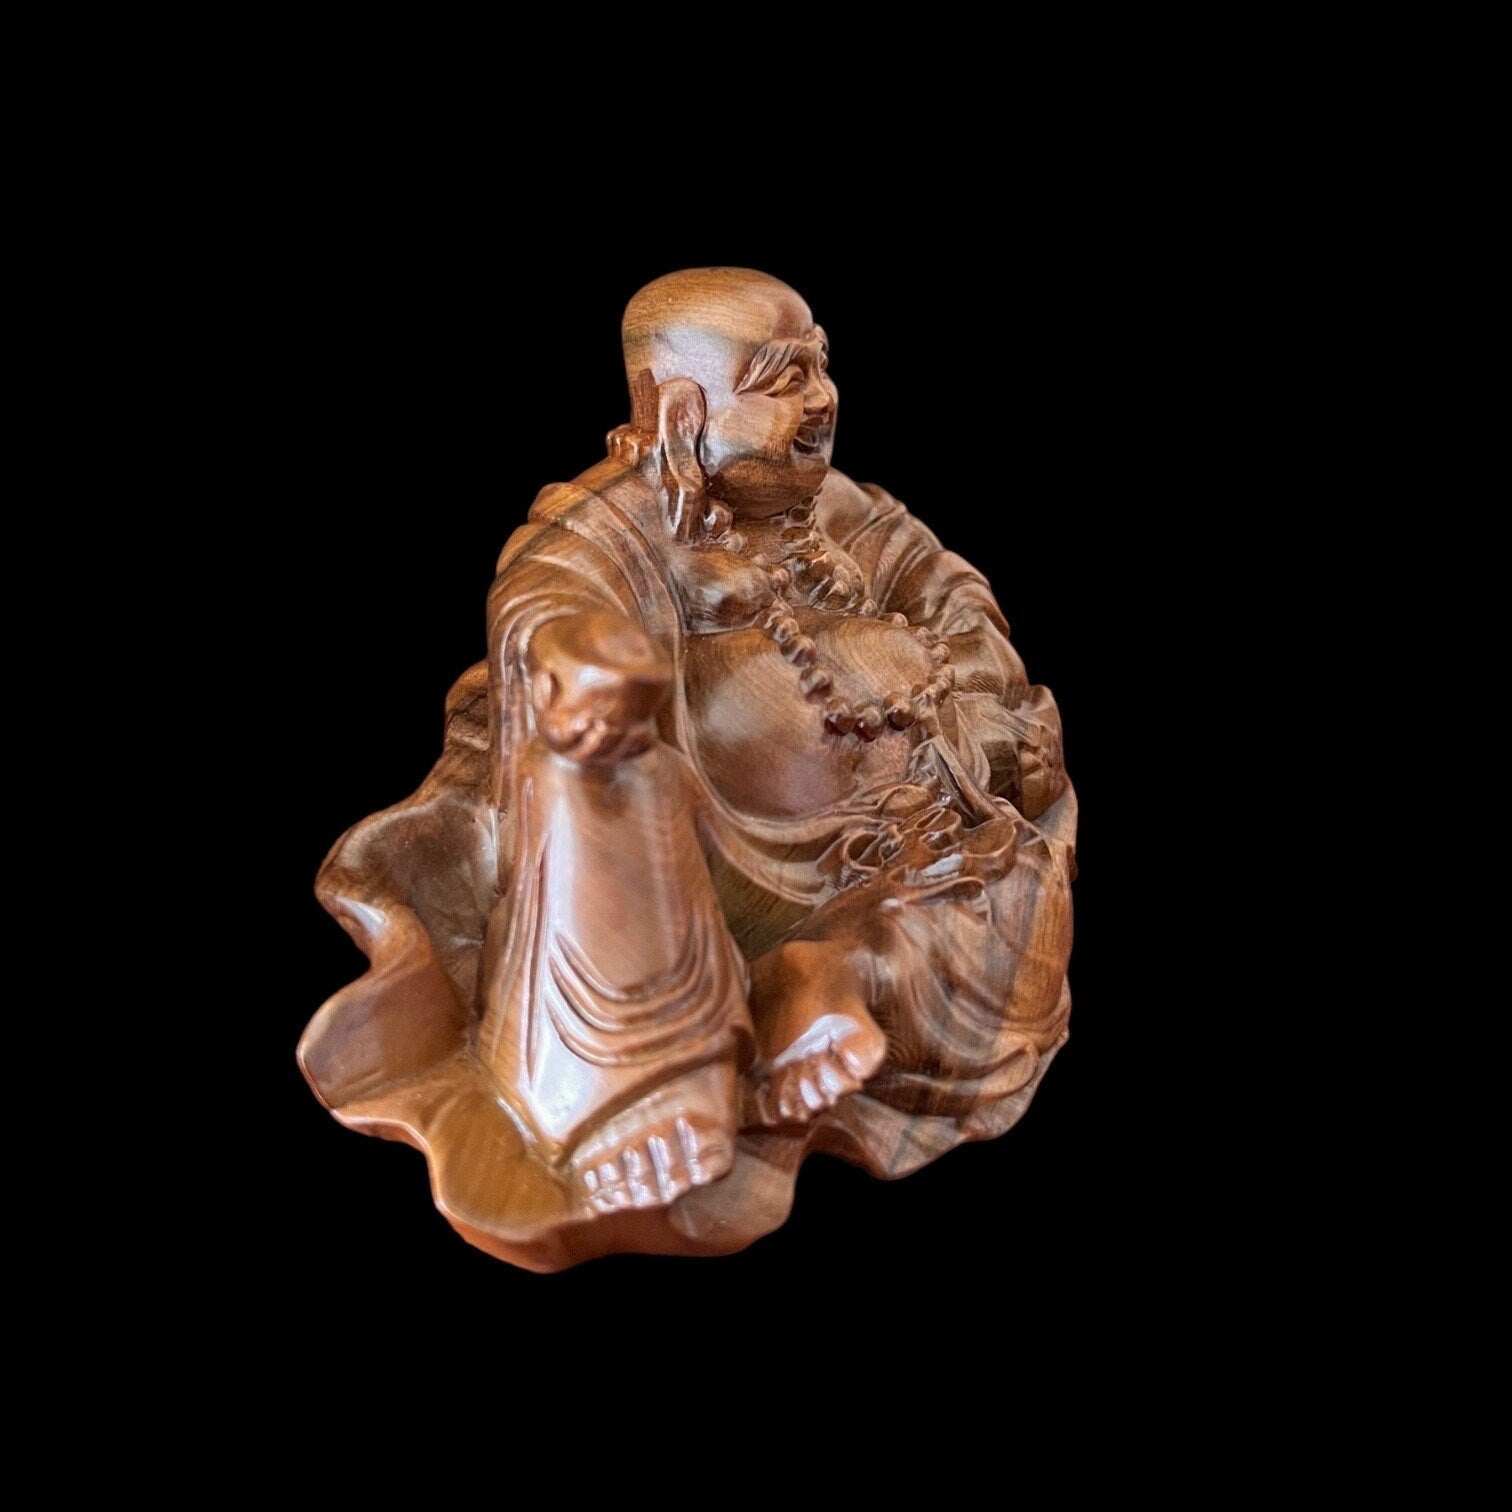 God of Wealth Fragrant Wood Statue, Smiling Maitreya Buddha, Lucky Fengshui Laughing Happy Buddha Figurine Brings FortuneTuNaCraftCollection